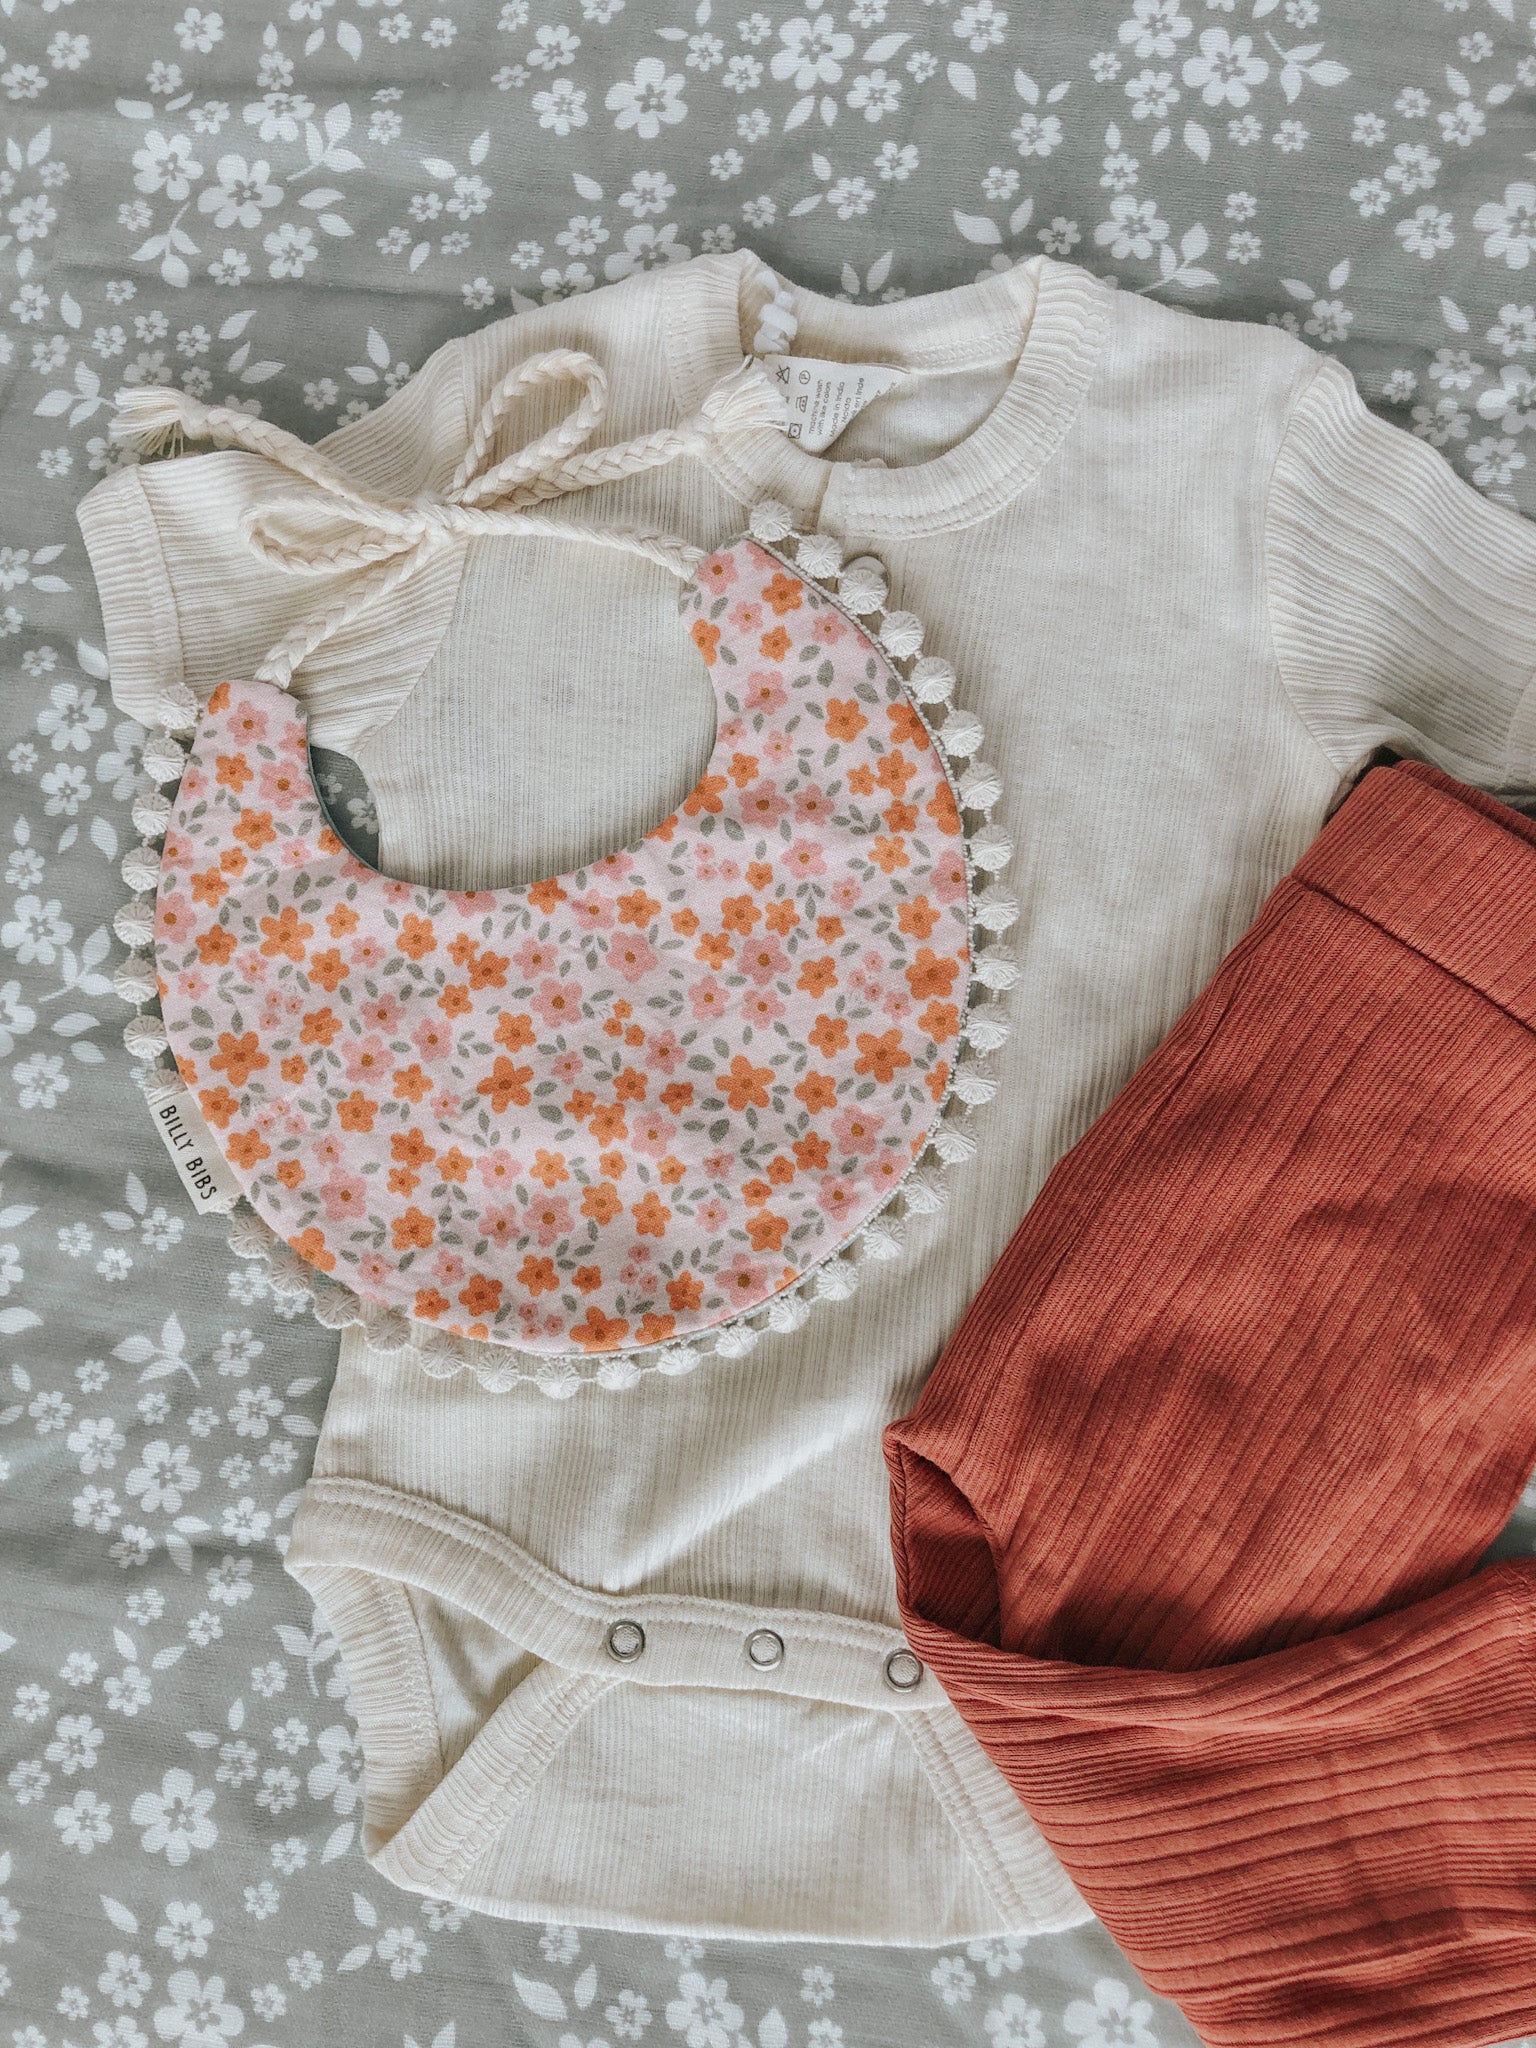 billy-bibs-baby-outfit6